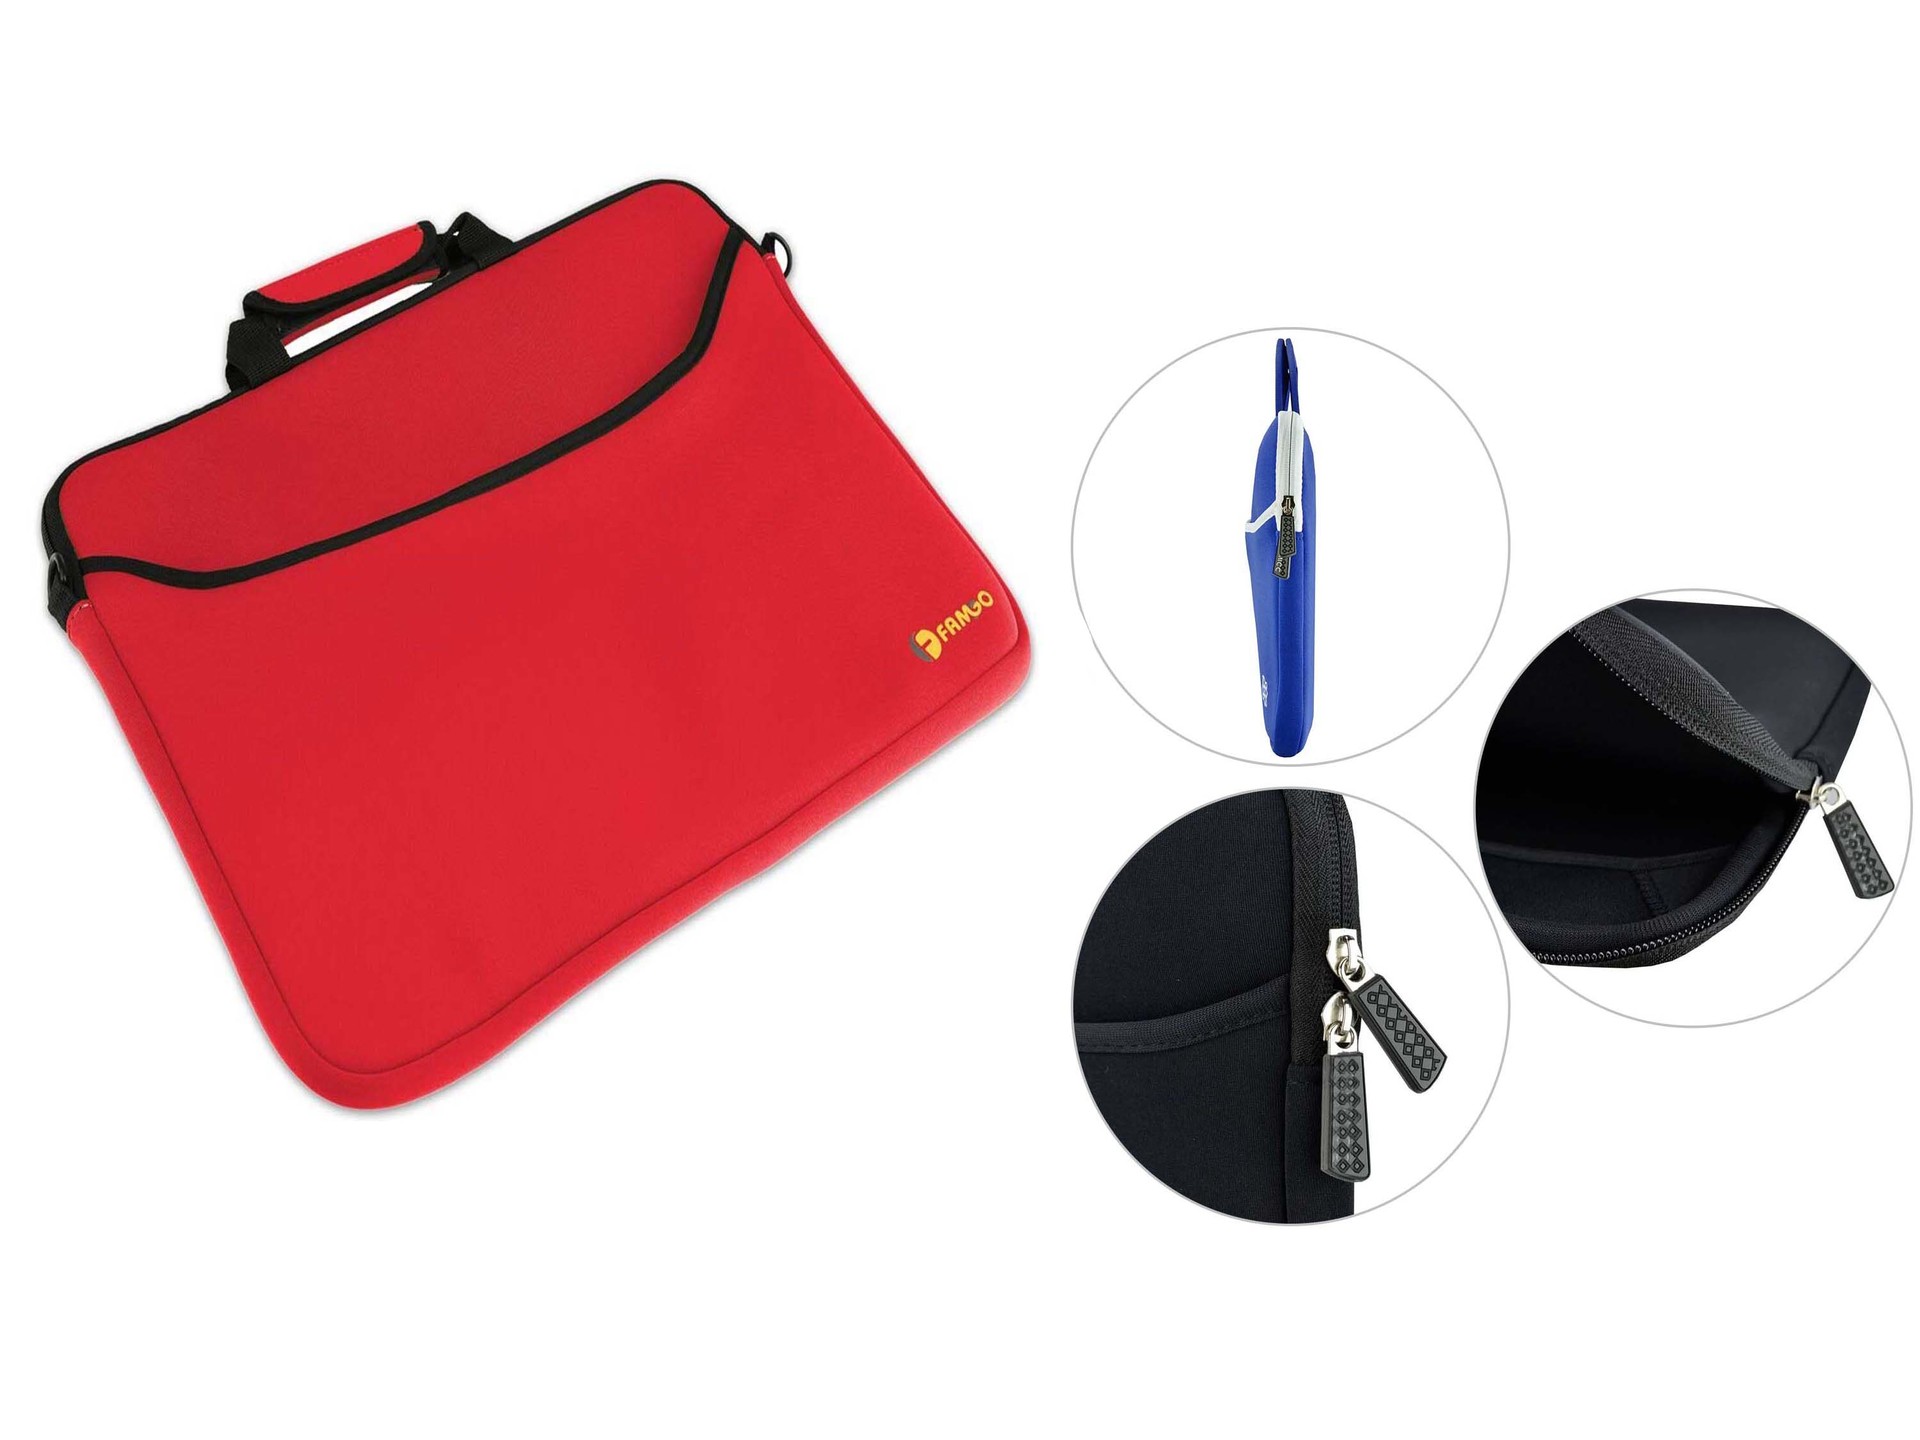 double Neoprene bag with accessories pocket for hiking